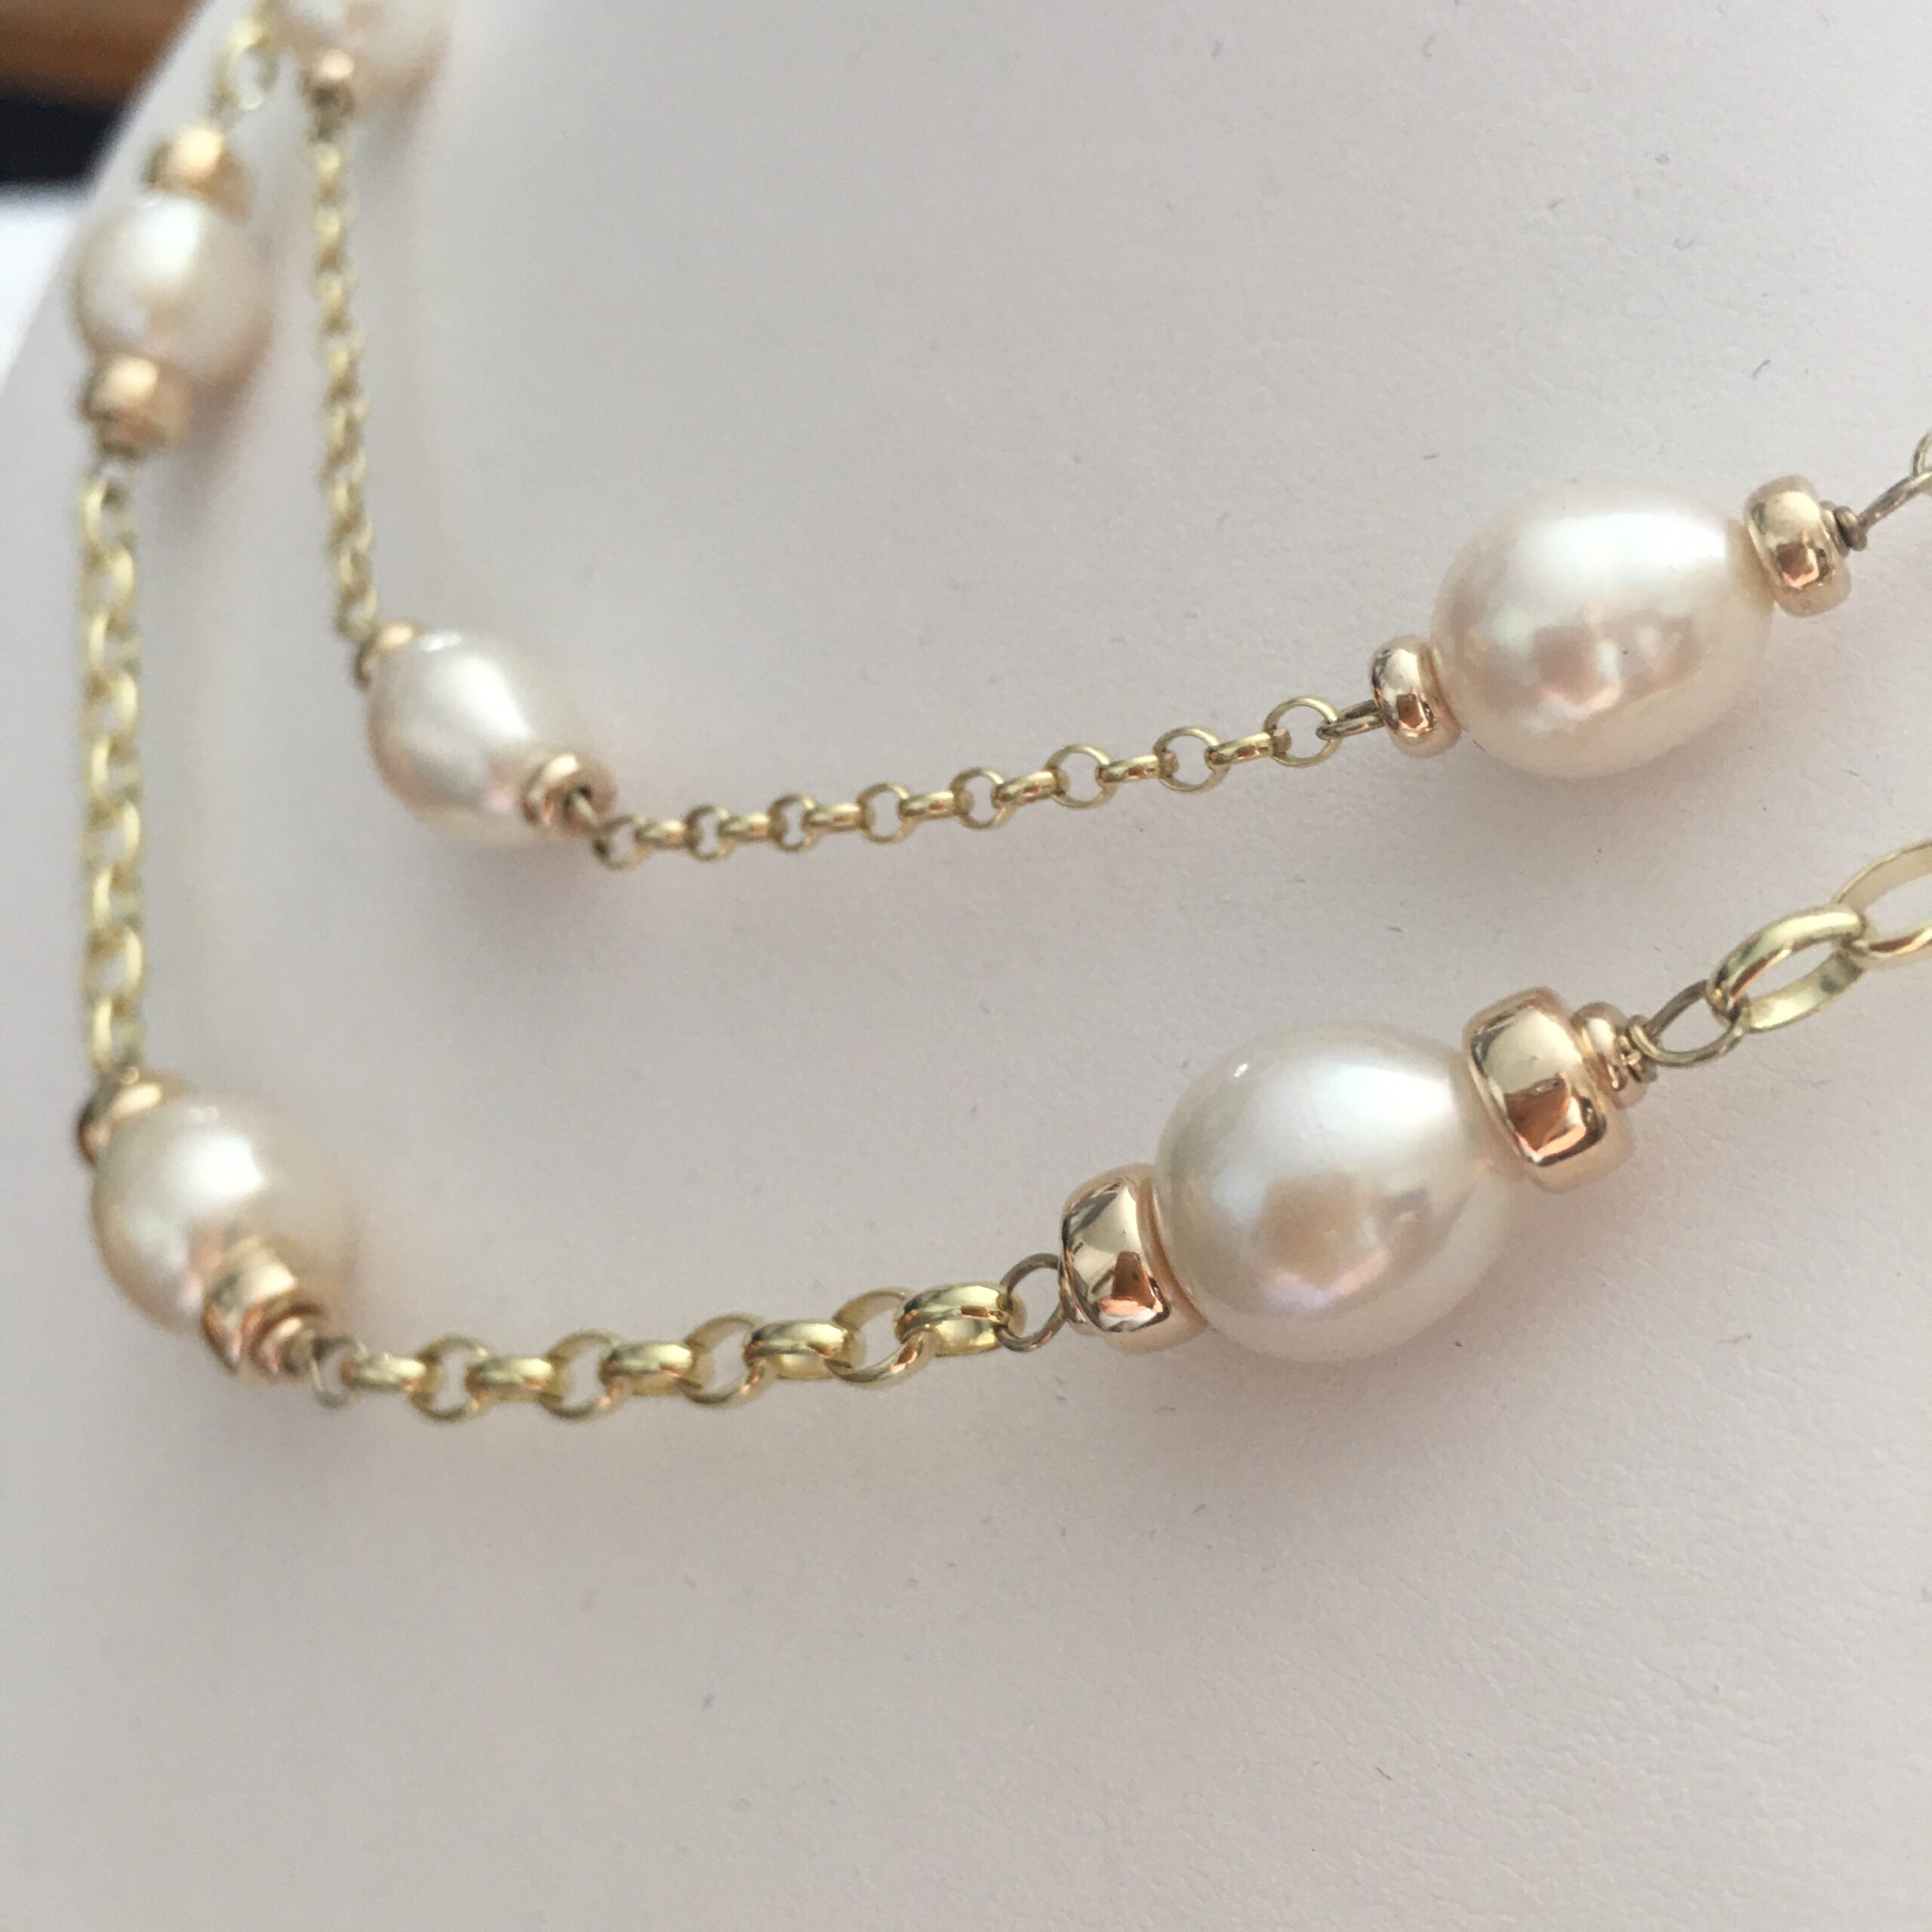 Heavier Mary Berry Style Necklace - Harriet Whinney Pearls